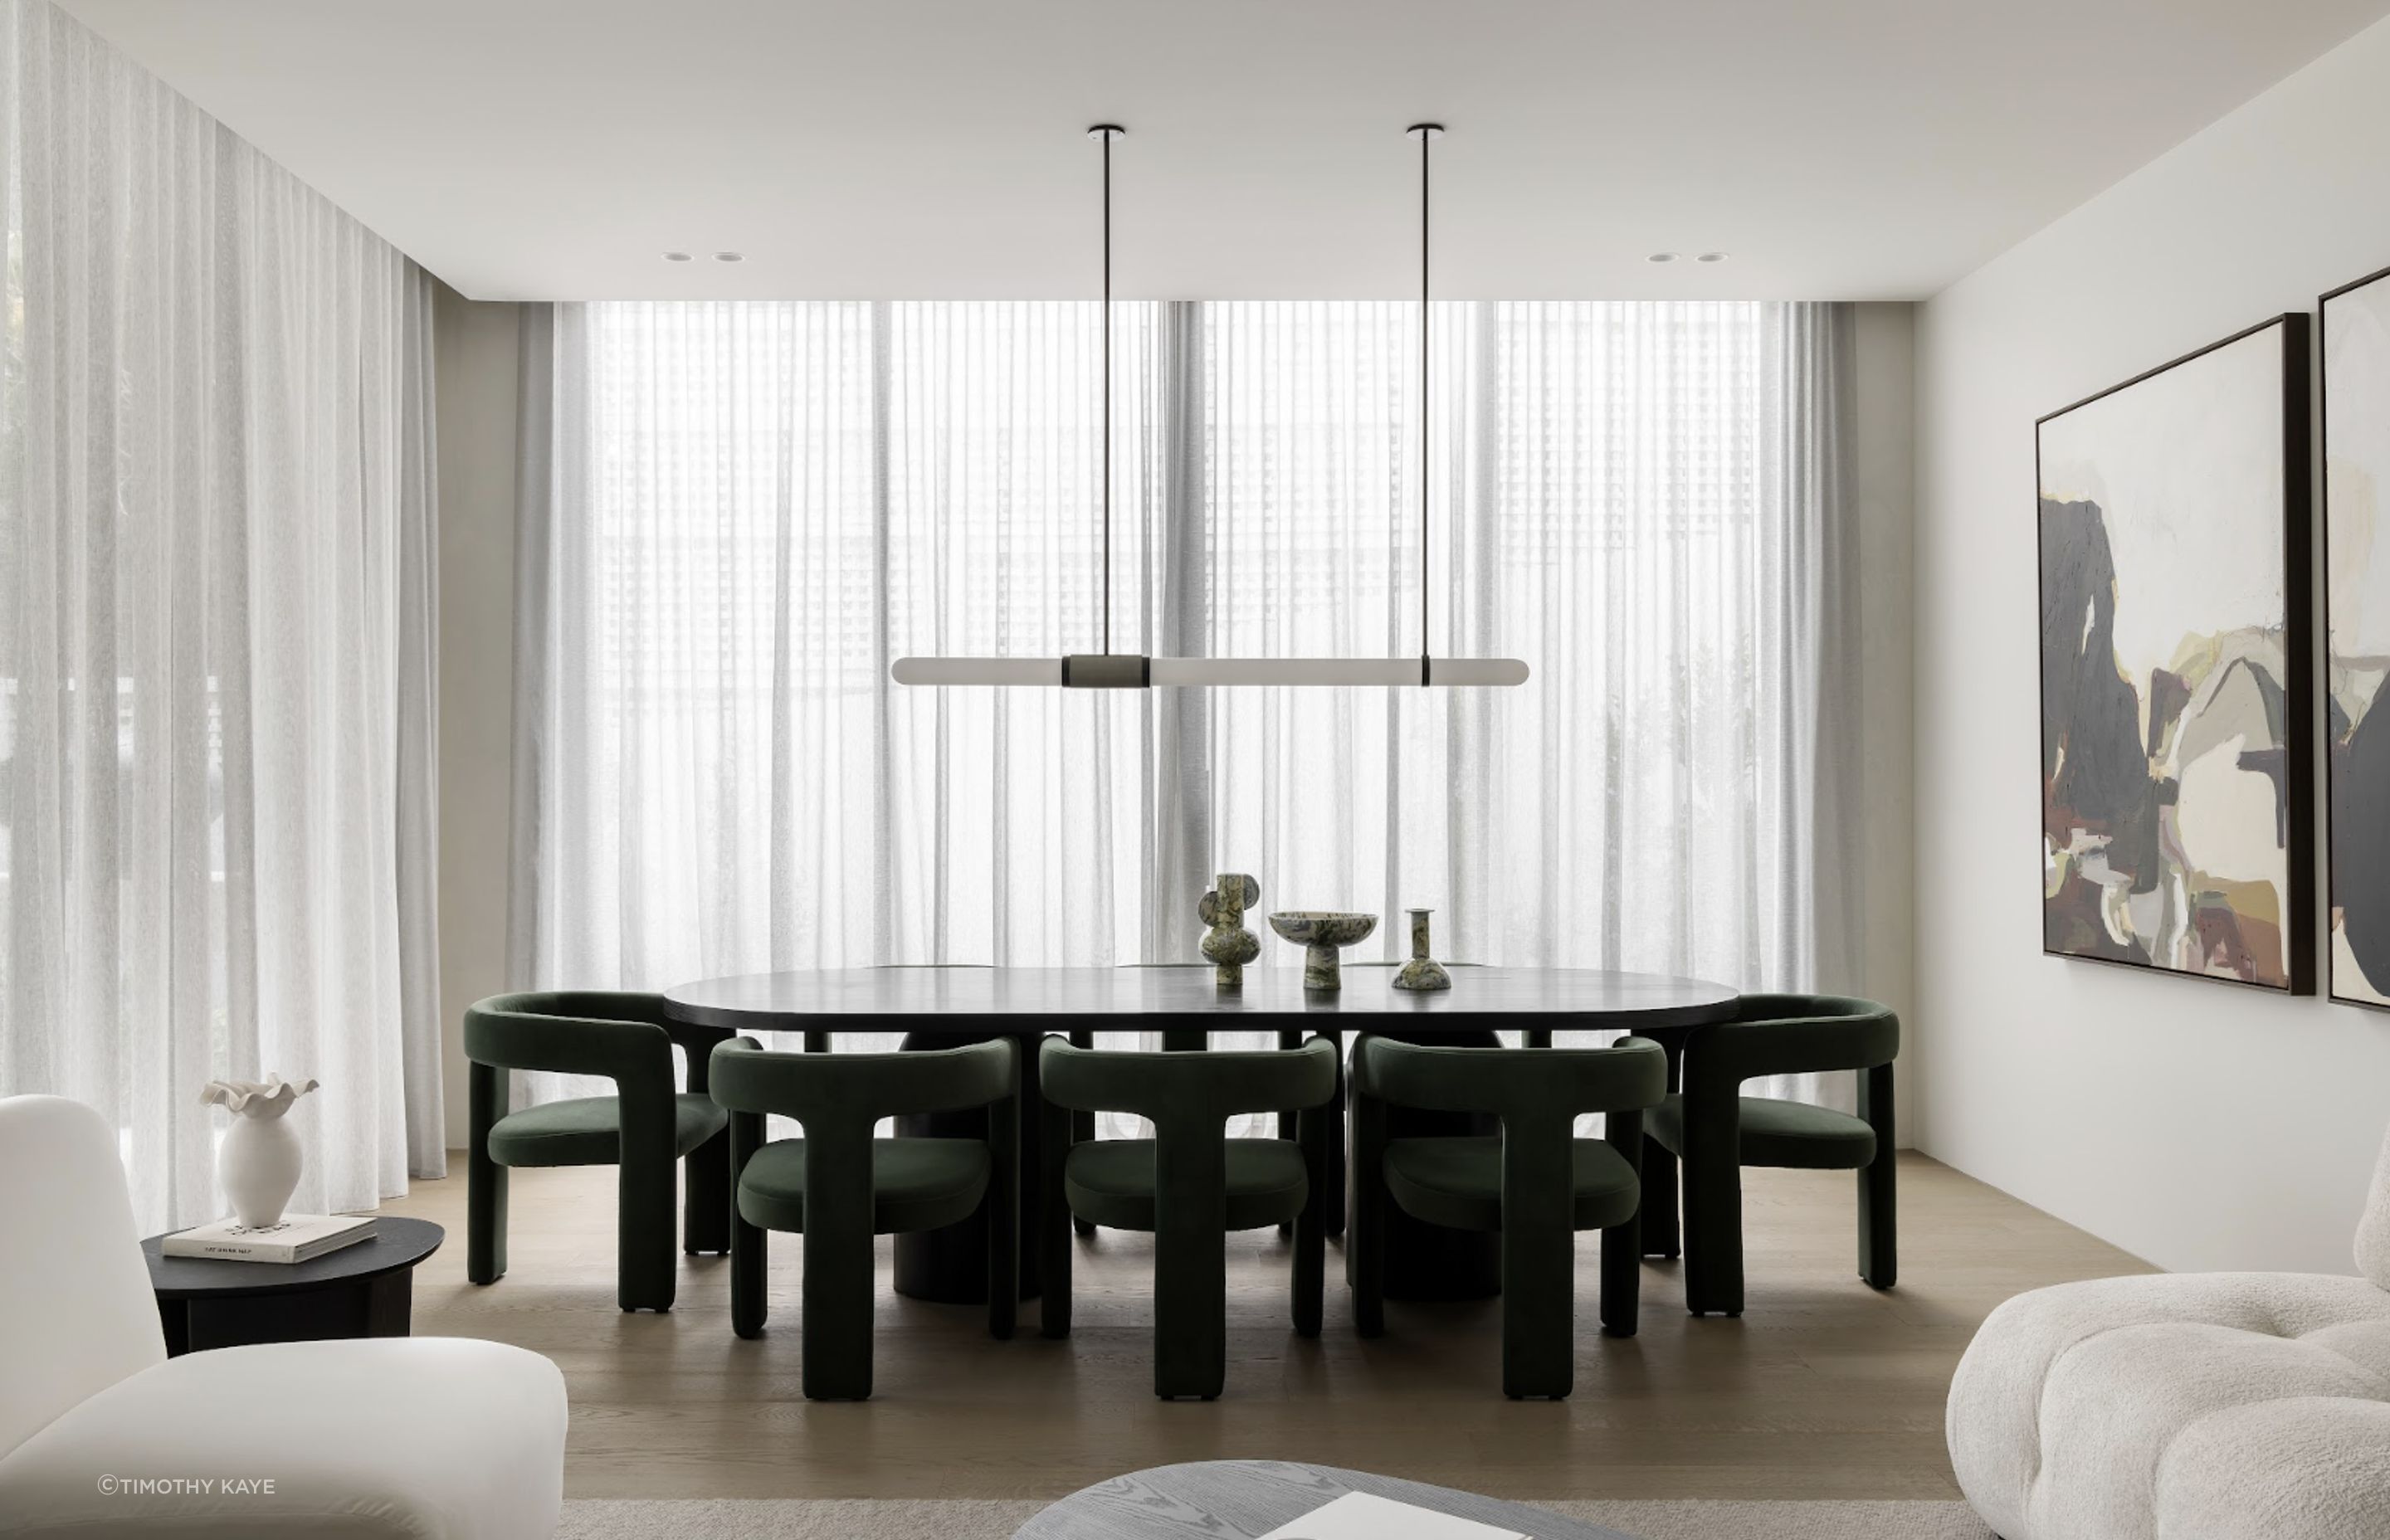 Matteo by Trinity meets in that enviable space between simplicity and sophistication – drawing inspiration from contemporary, minimalist forms, light-filled entities and timeless materials.